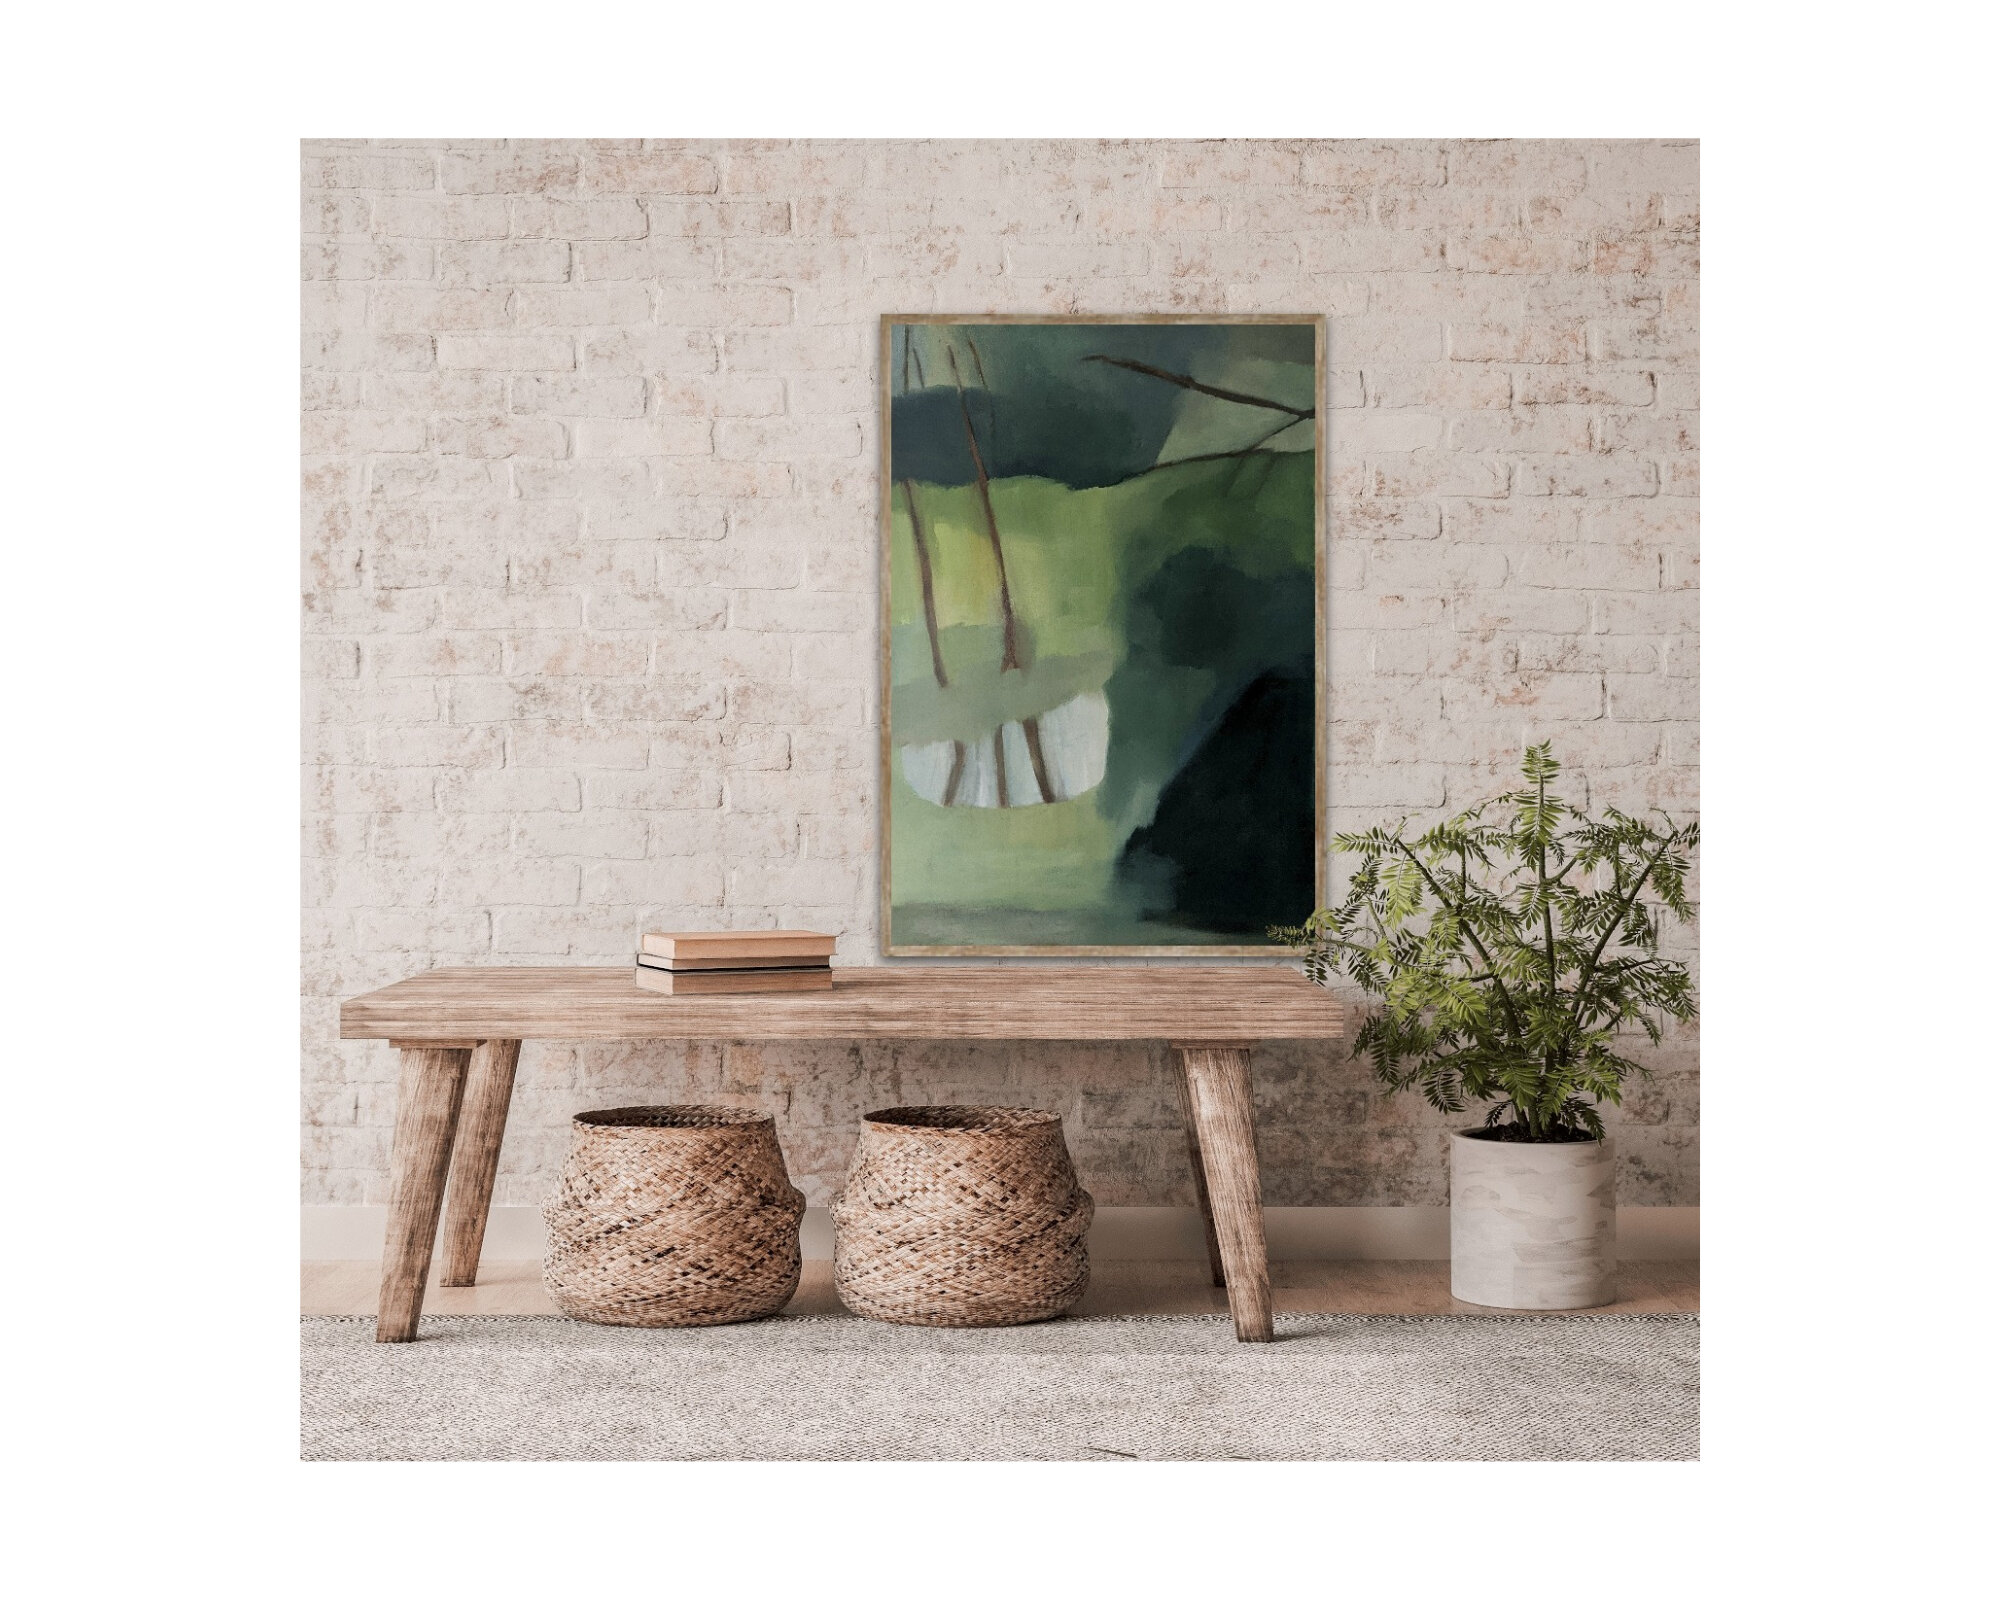   Creating Stories Chapter two rewrite  Oil on canvas 90cm x 60cm framed in oak The second chapter to a new collection of works entitled Creating Stories - looking at the landscape in my surrounding area of Oyster Bay - considering the many stories a